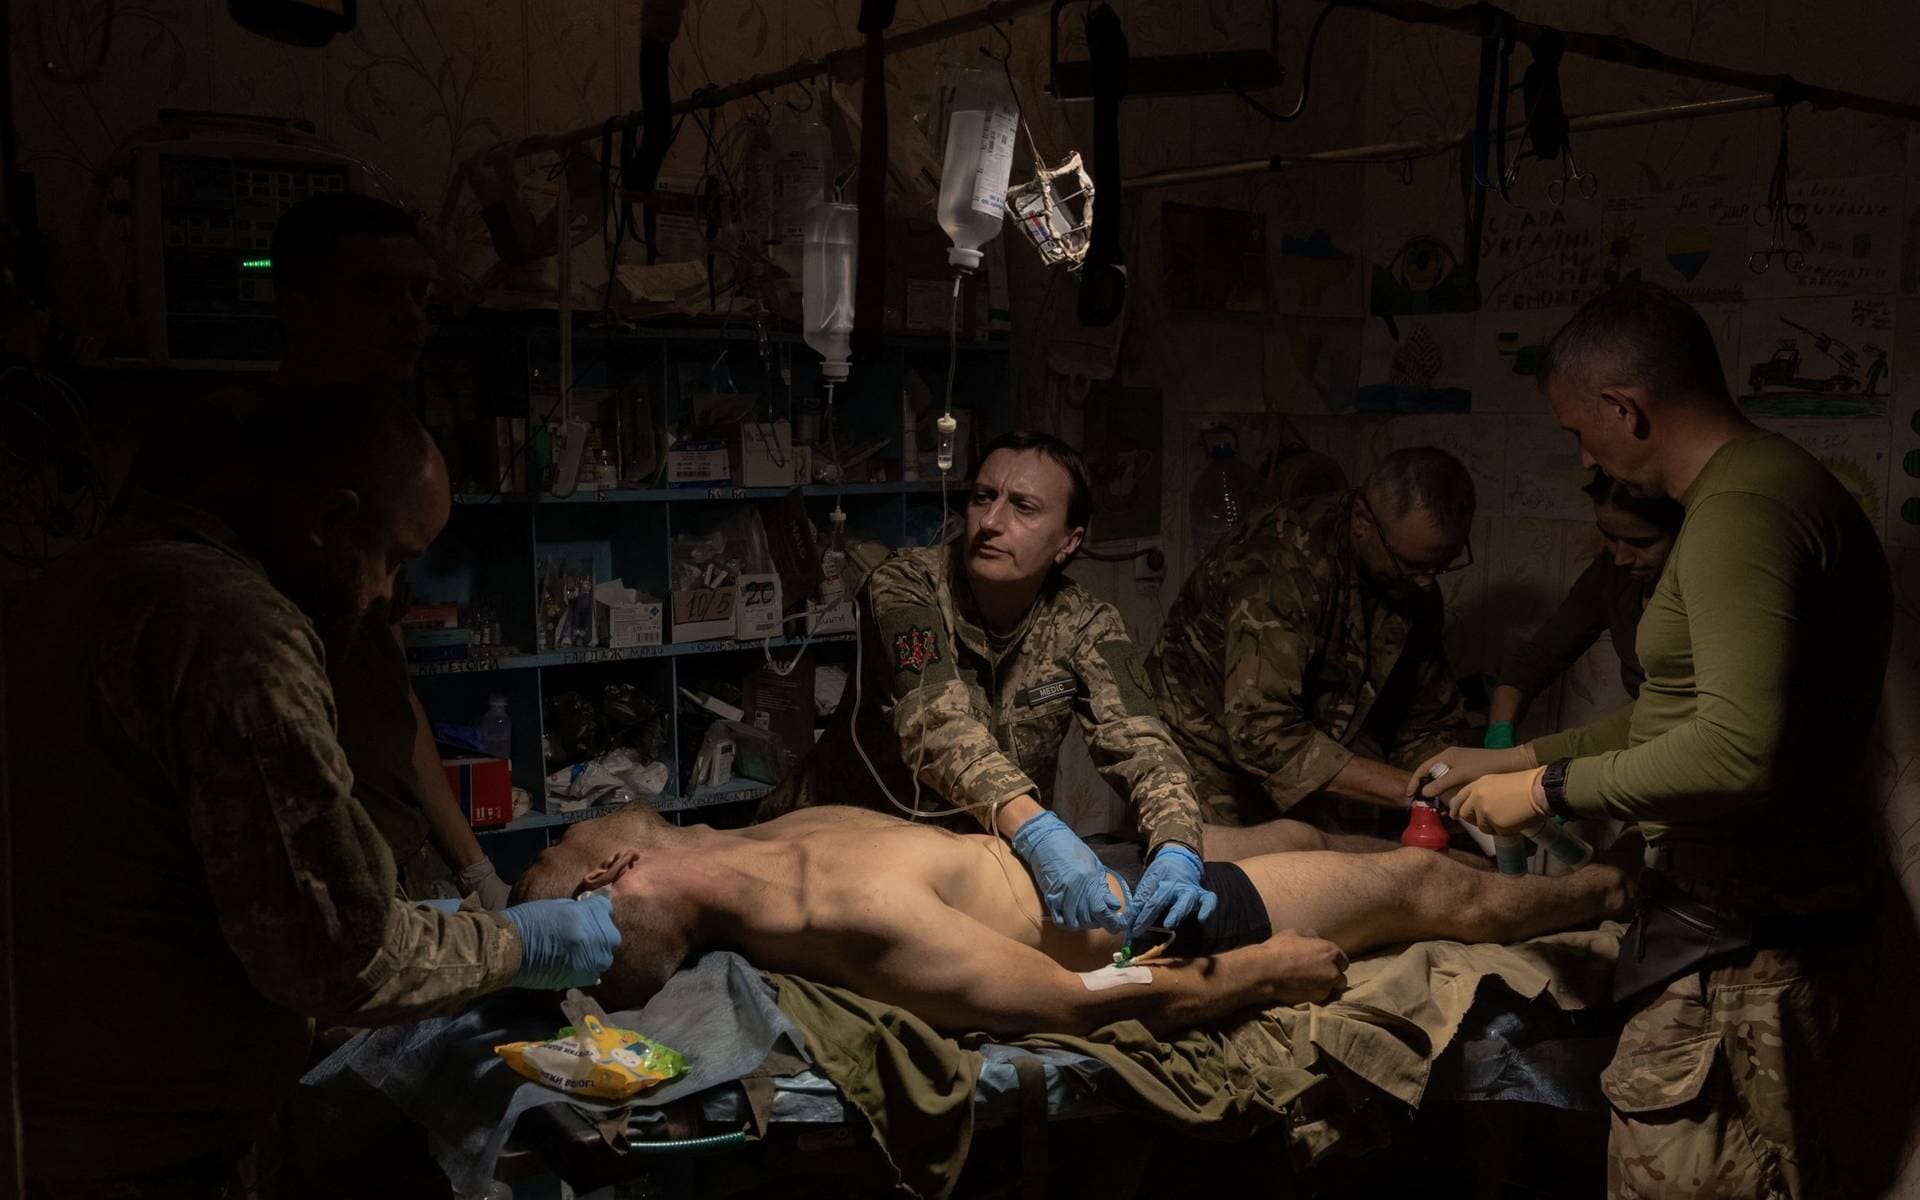 A wounded Ukrainian soldier is treated by Ukrainian military medics in a stabilization point in an undisclosed location near Bakhmut